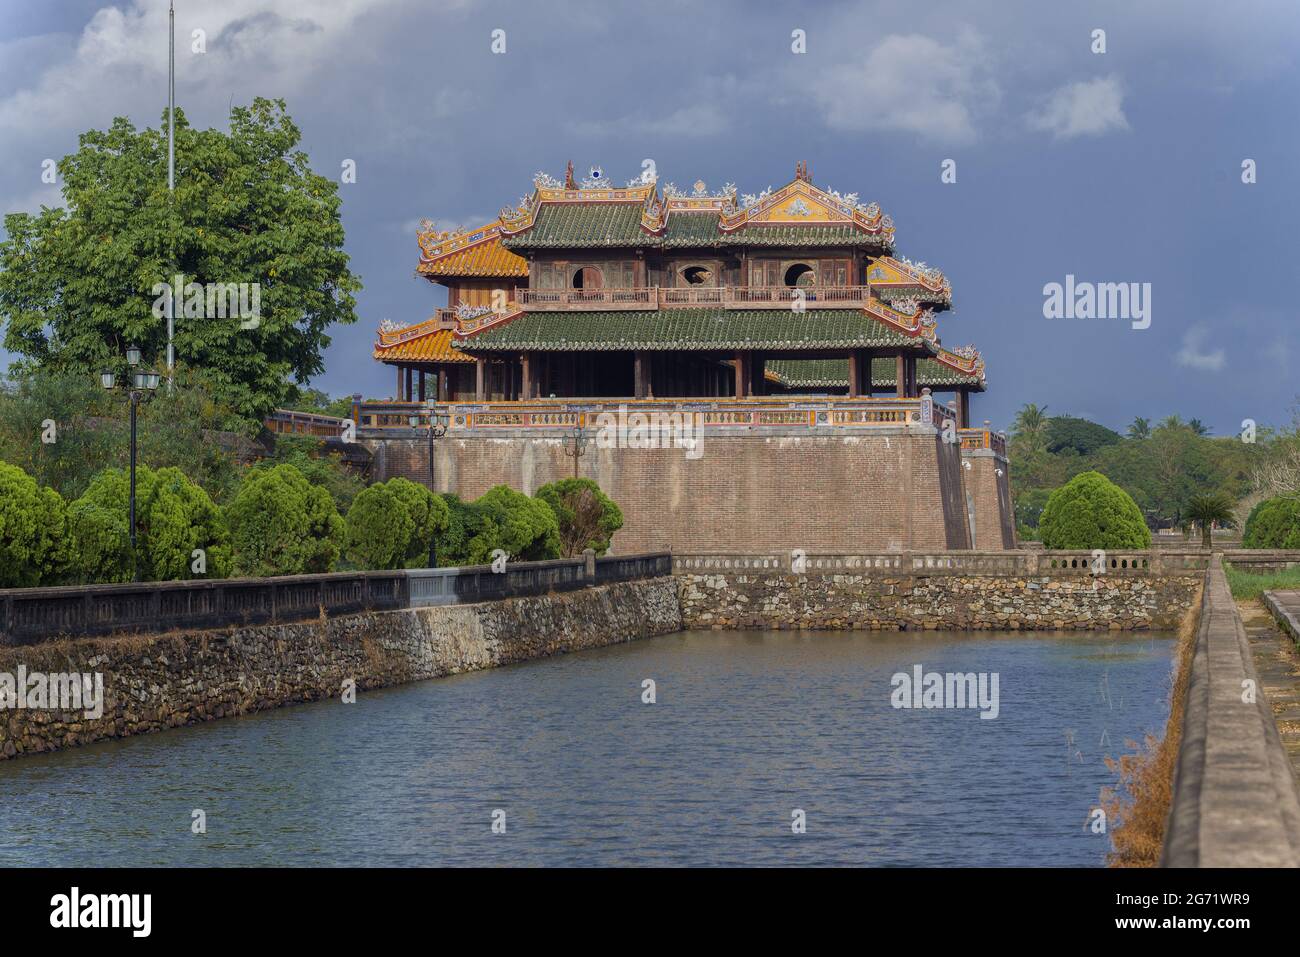 View of the ancient main gate (Ngo Mon Gate) of the citadel of Hue city. Vietnam Stock Photo